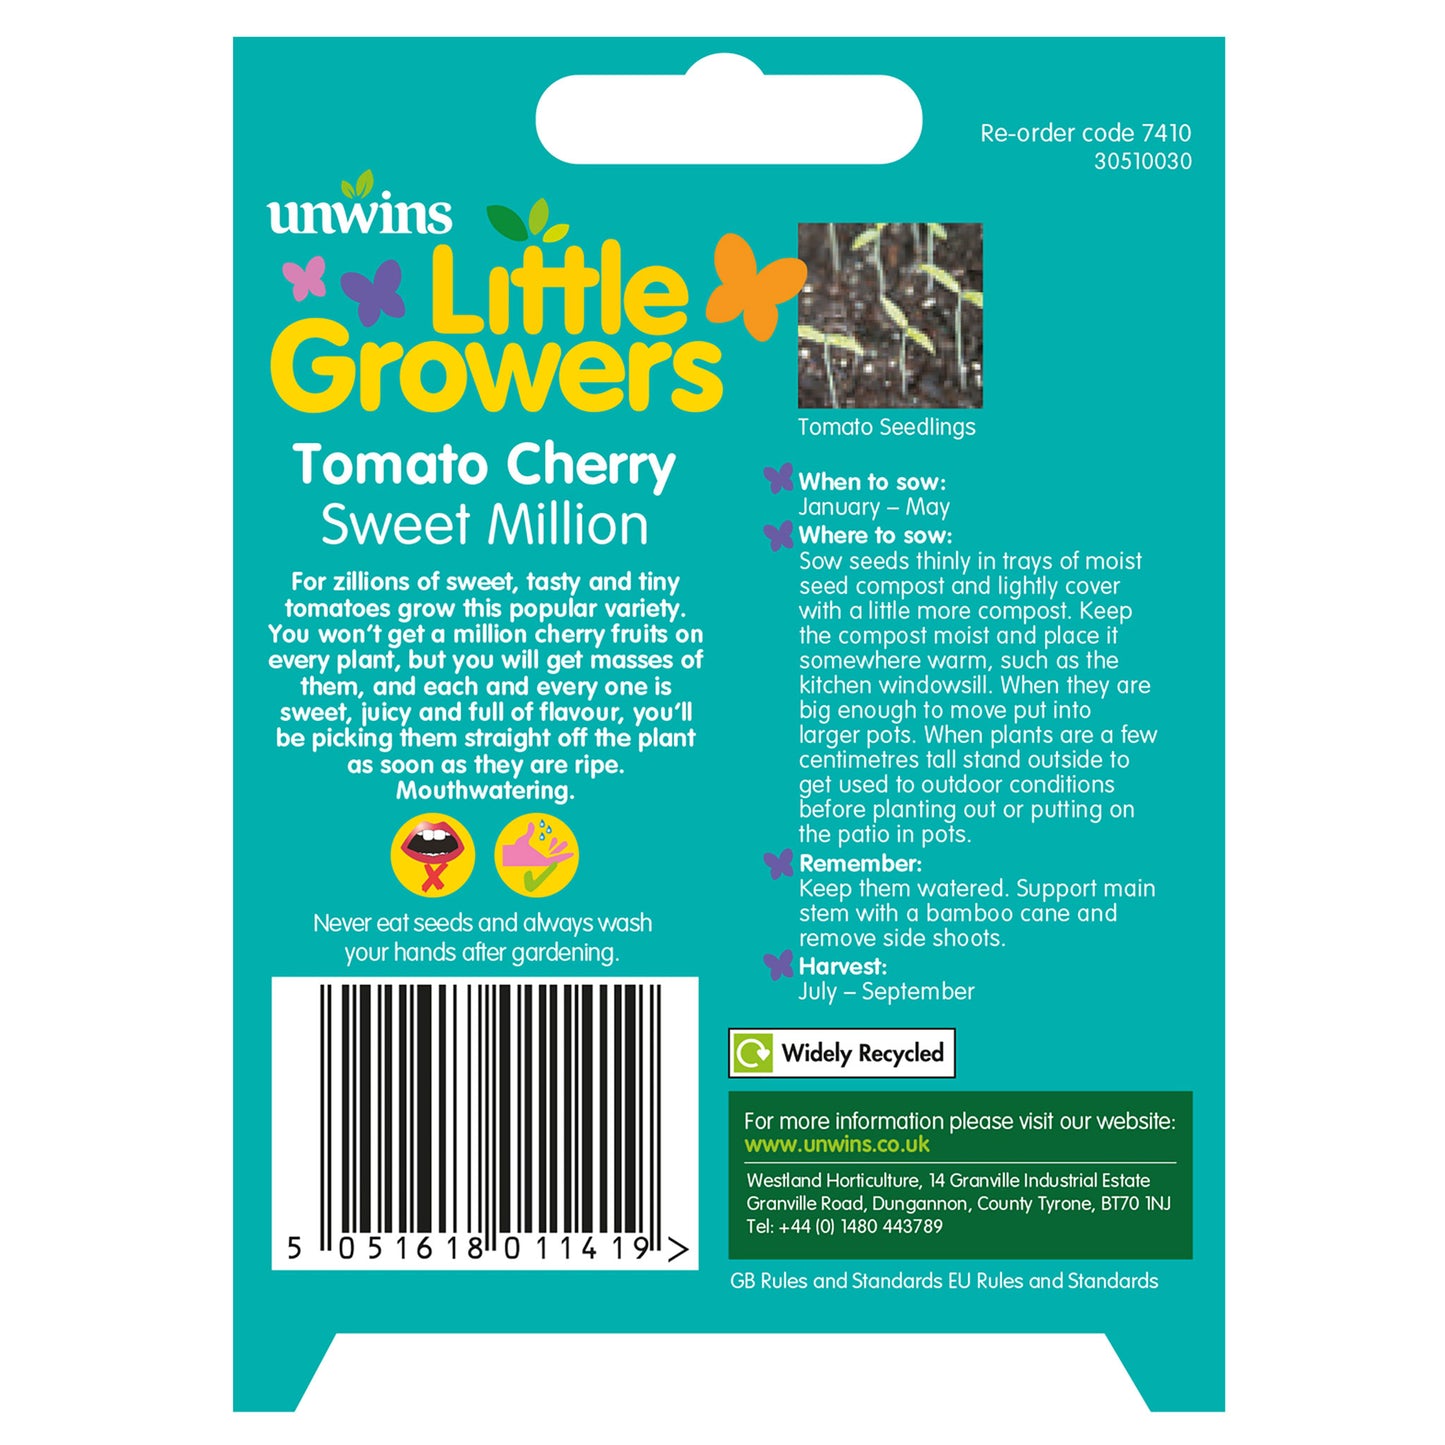 Little Growers Tomato Cherry Sweet Million Seeds back of pack